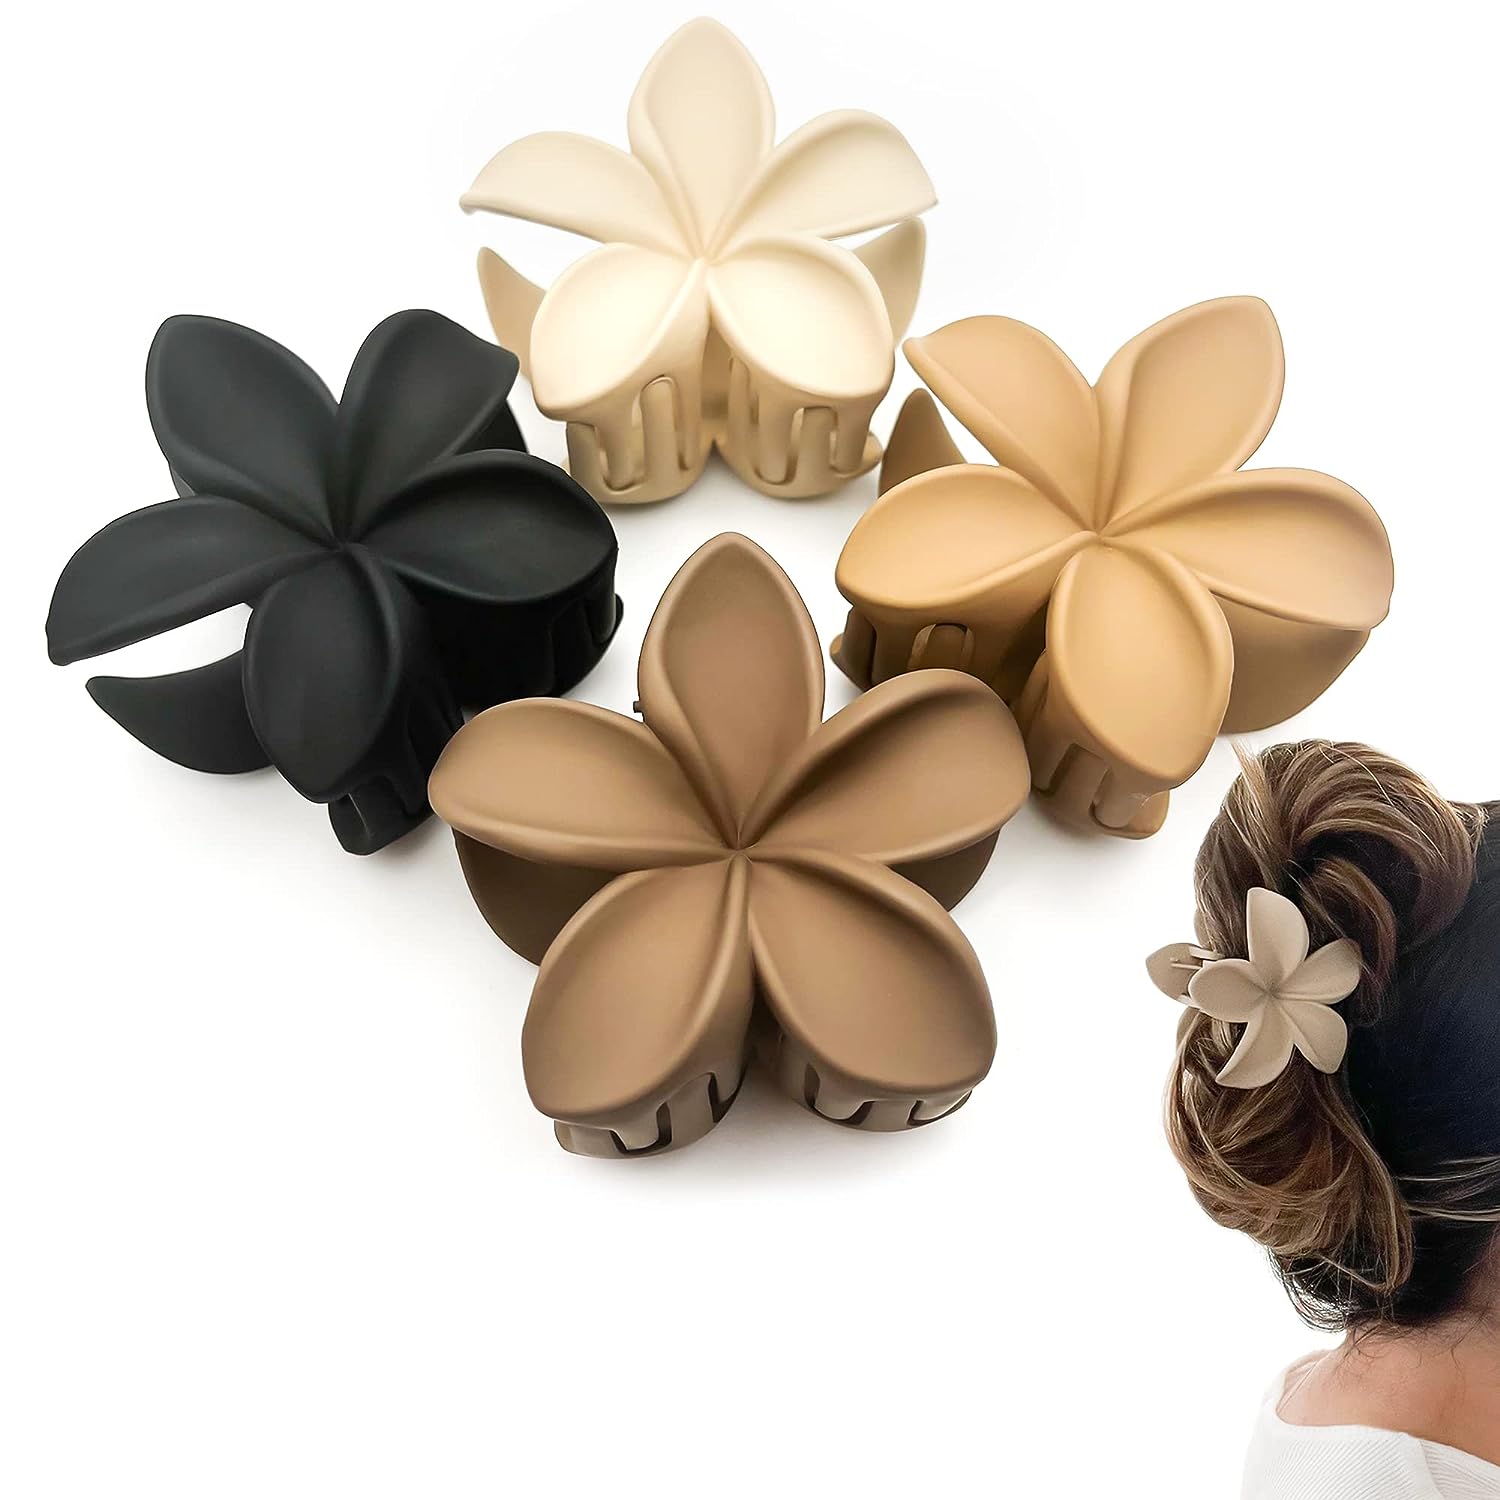 Luvearo Flower Hair Clips Variety Pack